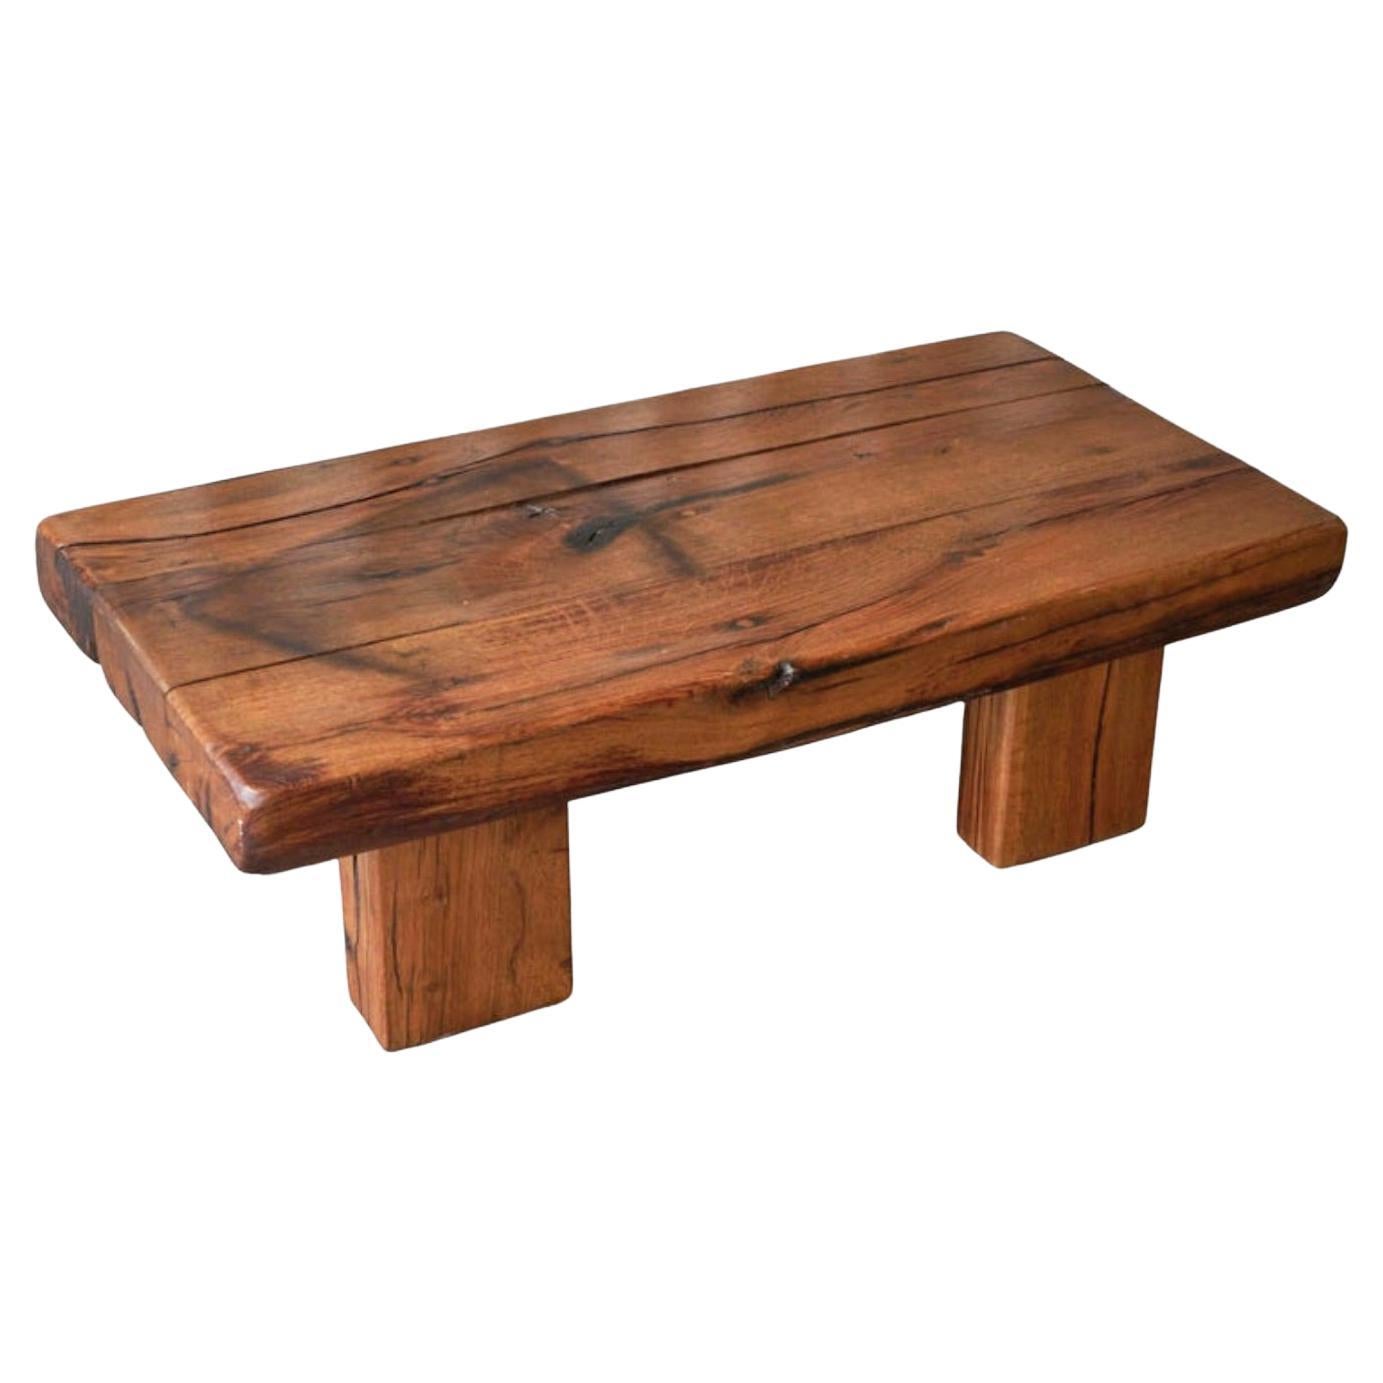 Brutalist Solid Oak Beam Coffee Table, Europe 1970s For Sale